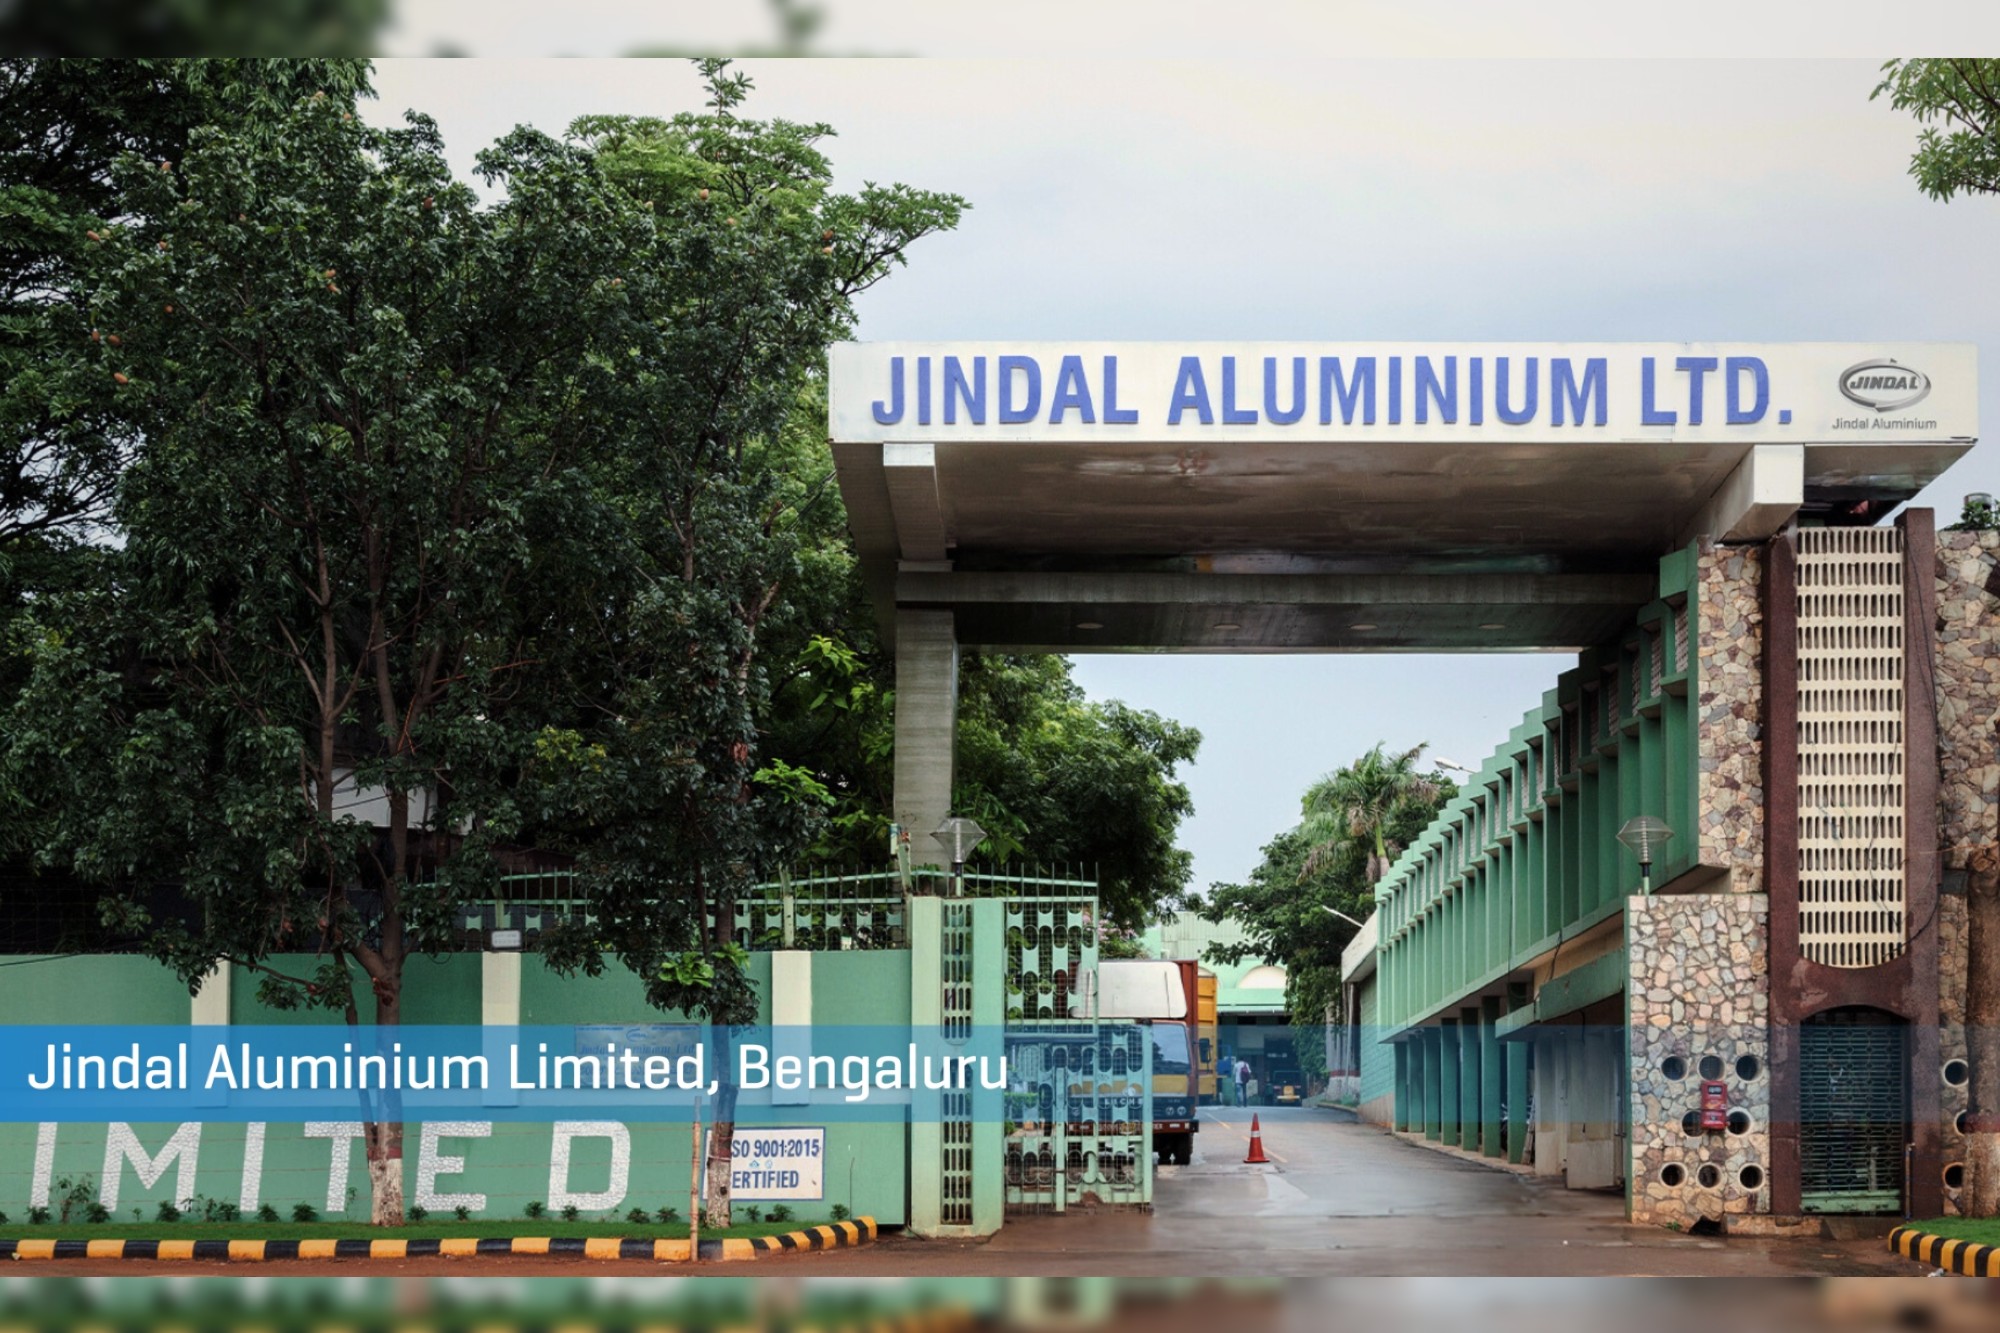 Jindal Aluminium, India's foremost aluminium extrusion company, has unveiled its latest venture a state-of-the-art Fabrication division, reinforcing its commitment to delivering comprehensive solutions.